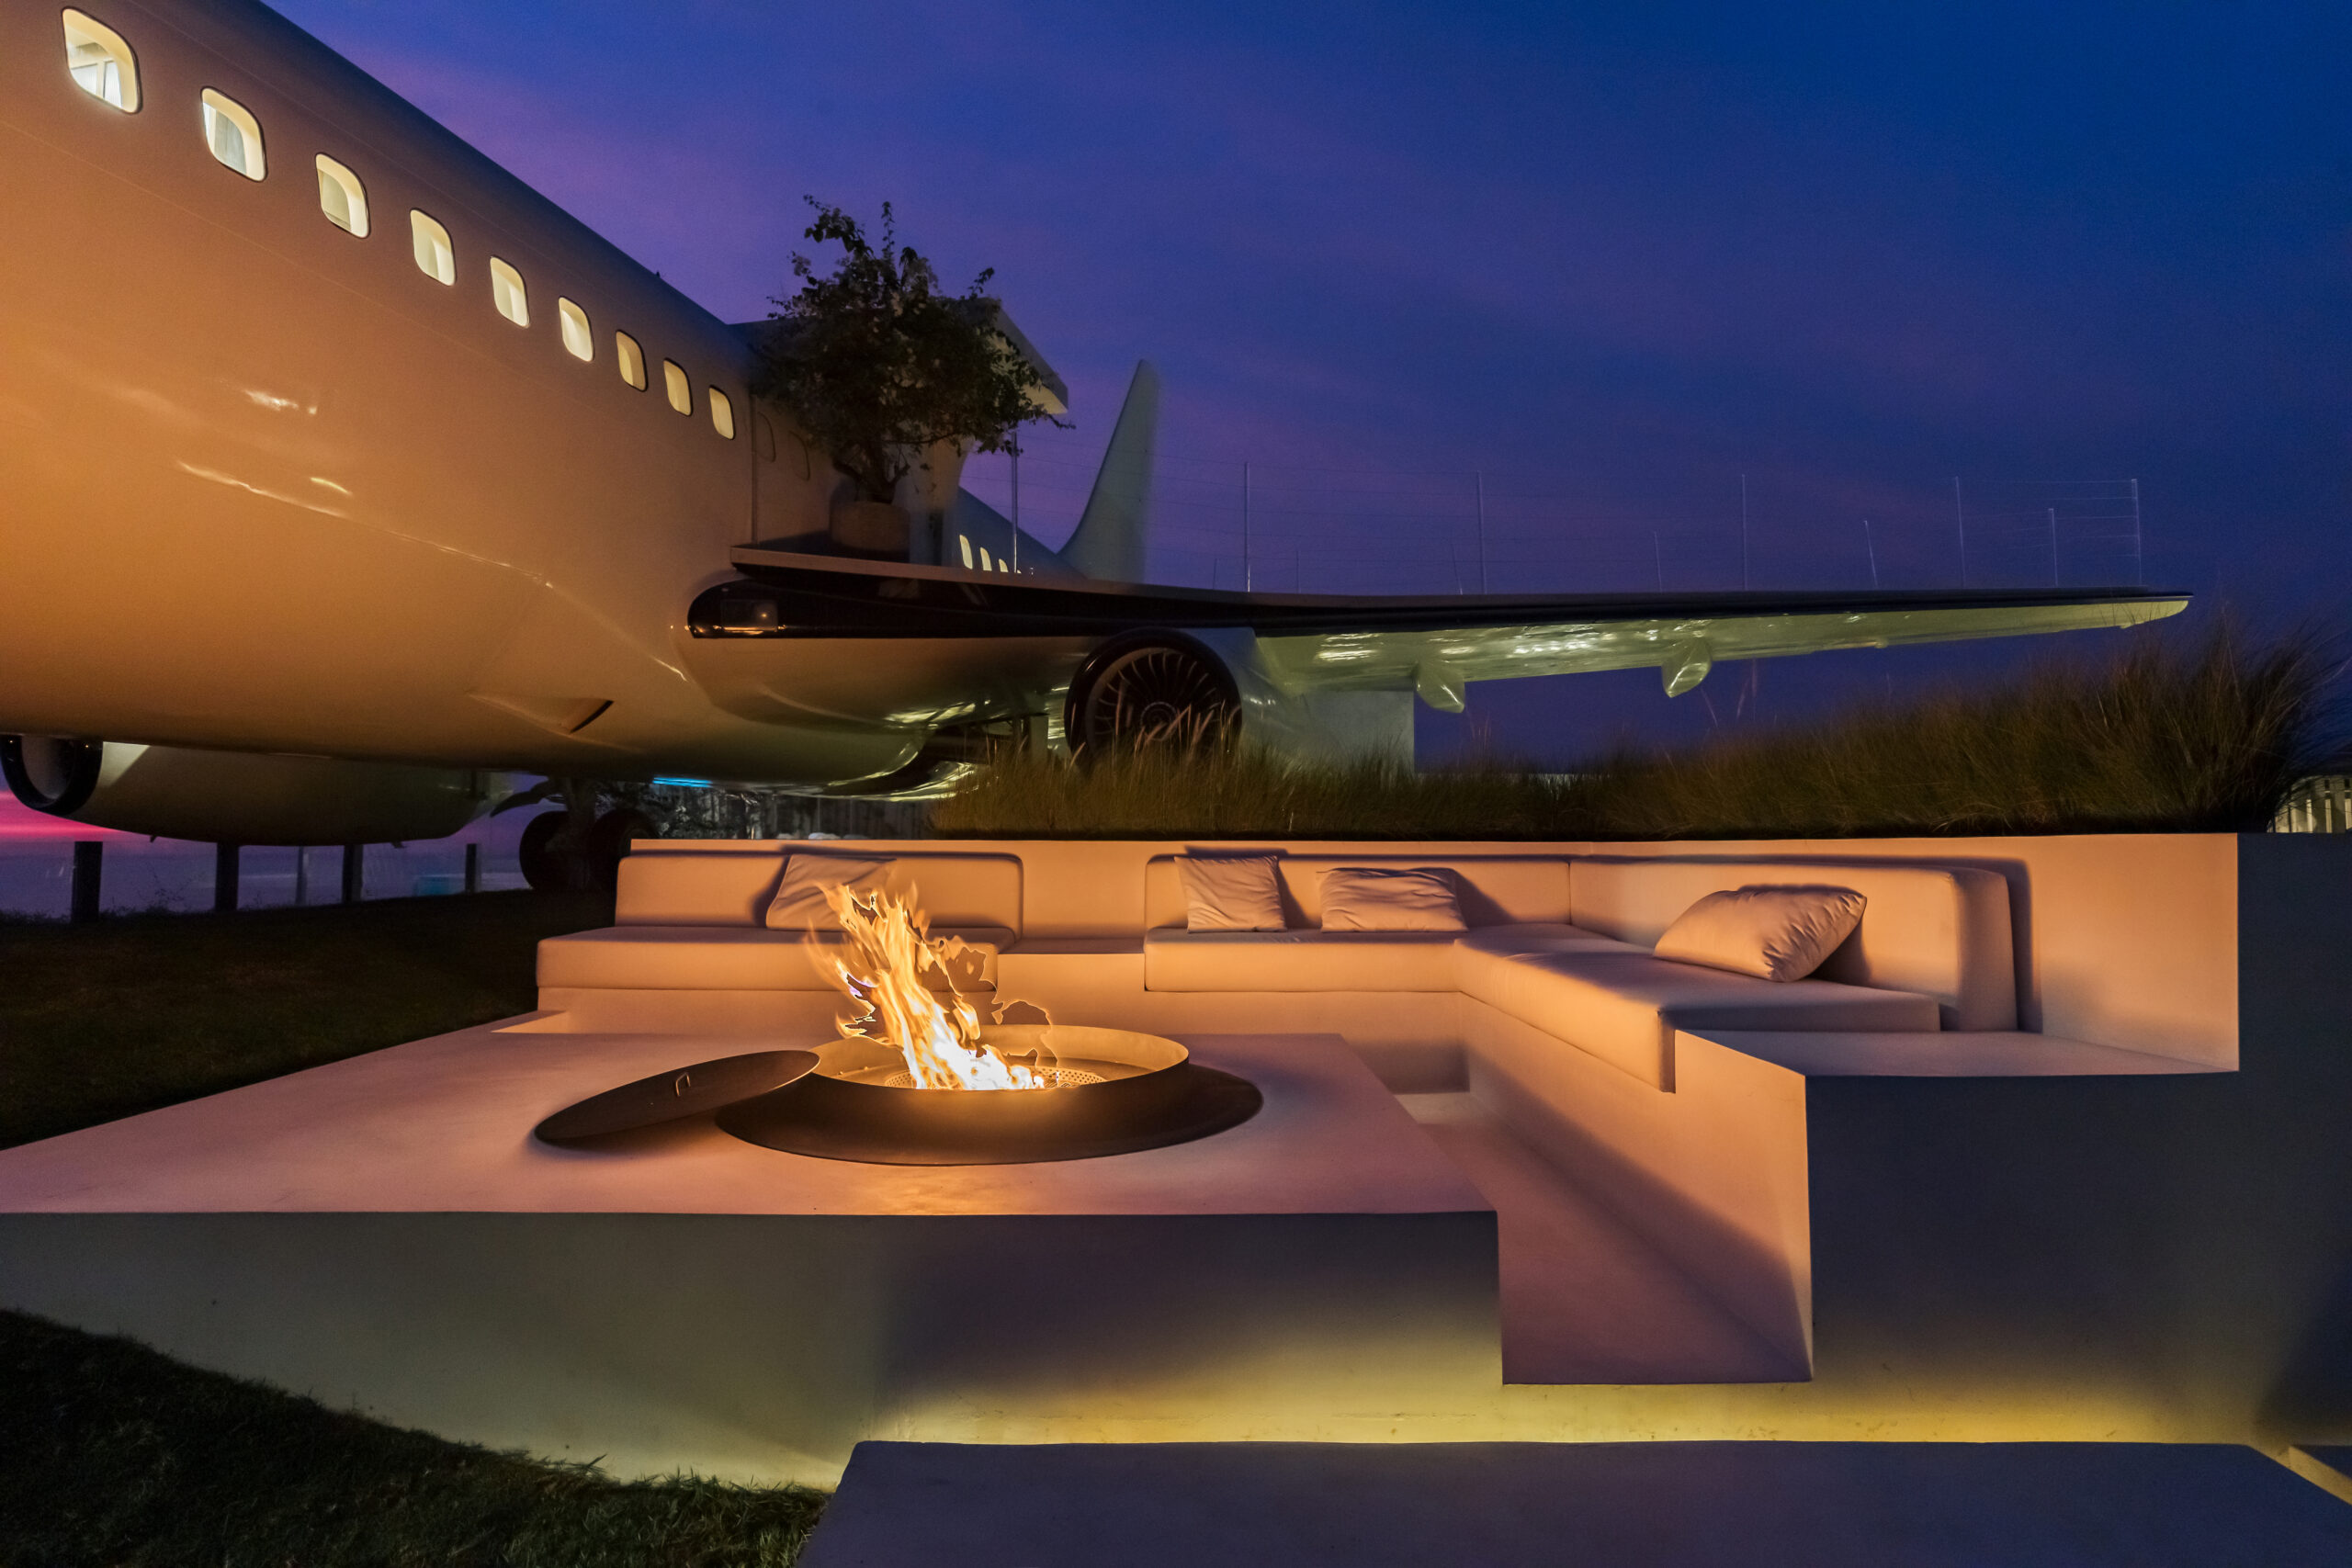 Private Jet Villa, Villa in the fuselage of an airplane